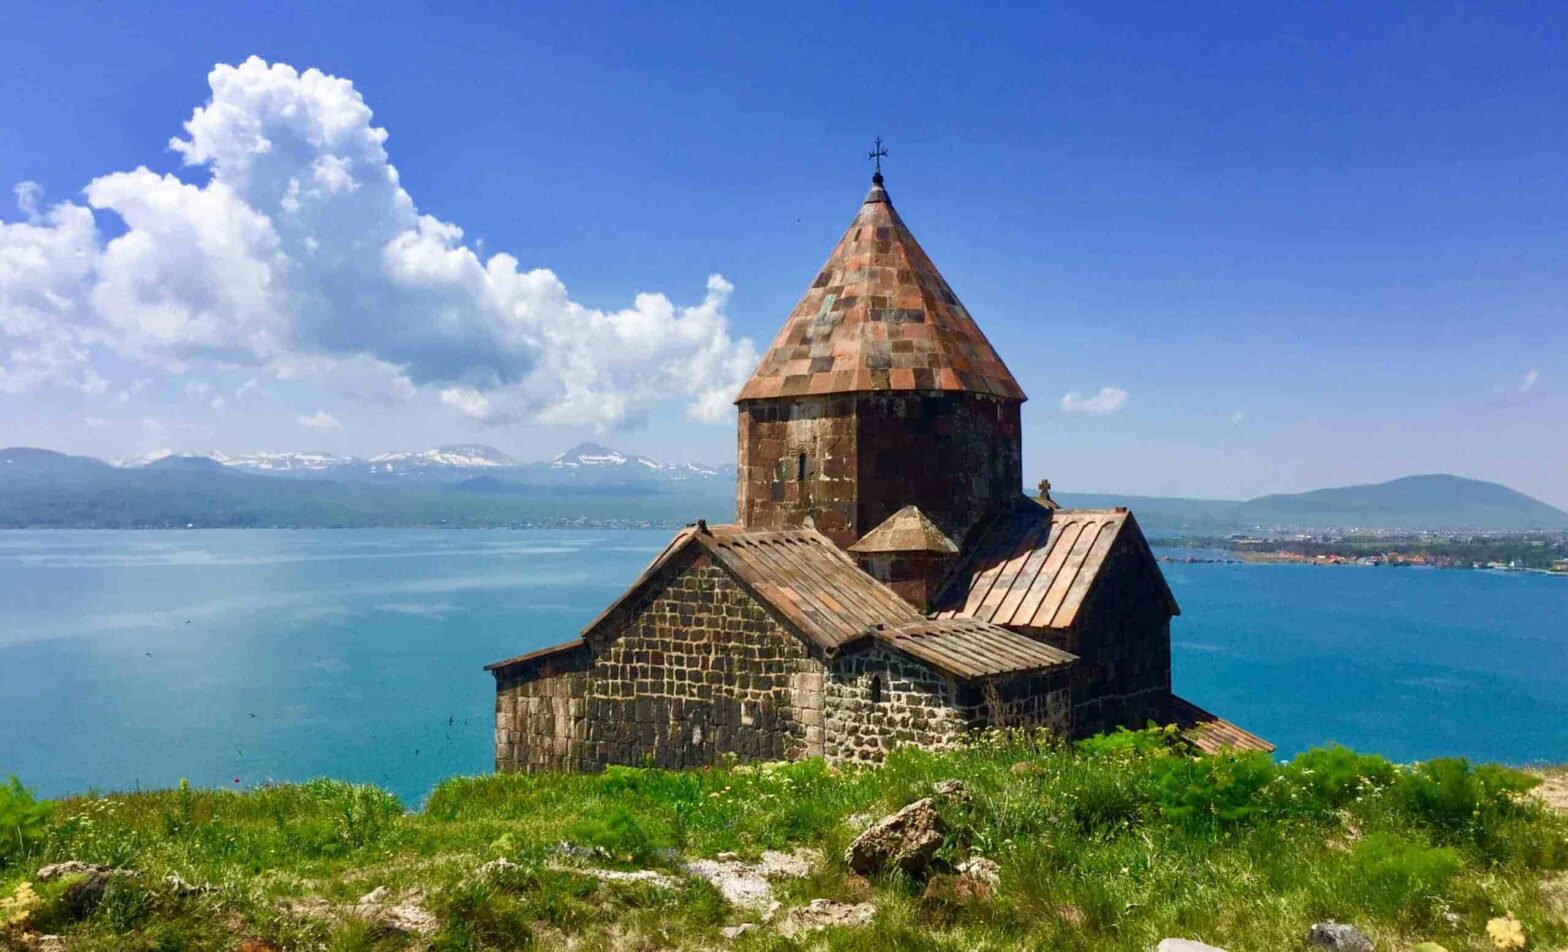 6 Days In The Scenic Mountains Of Armenia